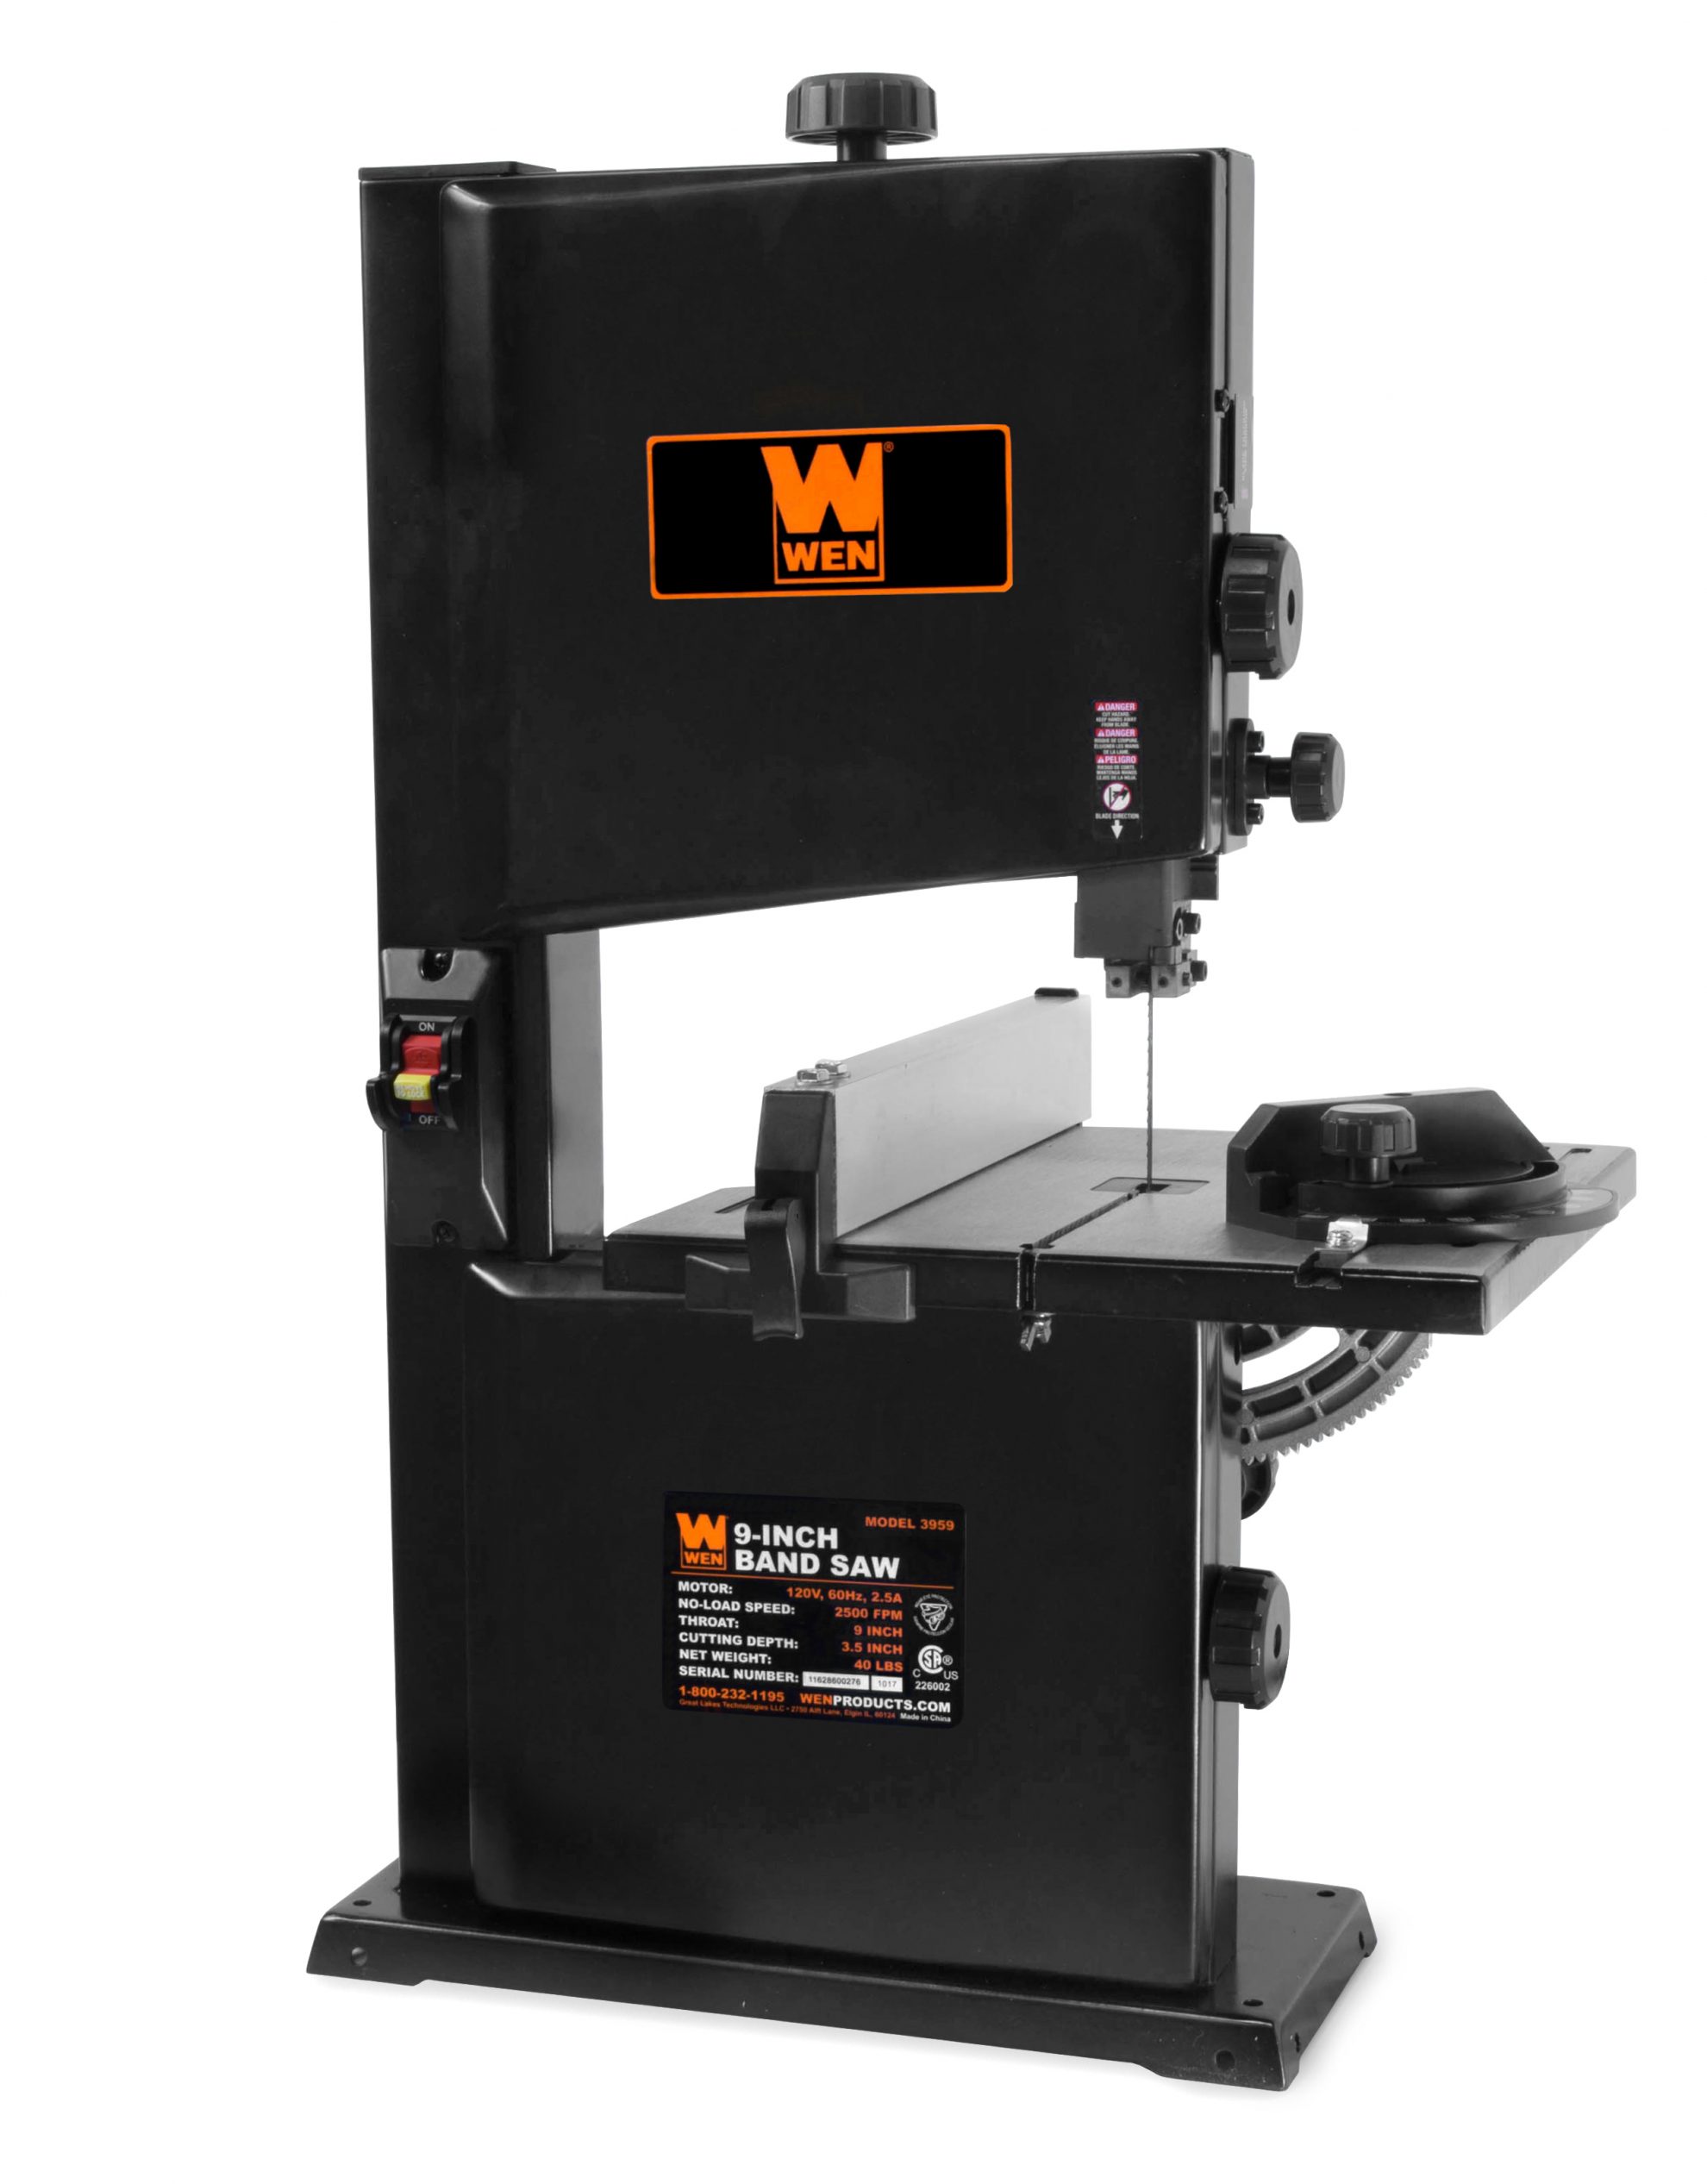 WEN 2.5Amp 9Inch Benchtop Band Saw, 3959 AwzHome The best at